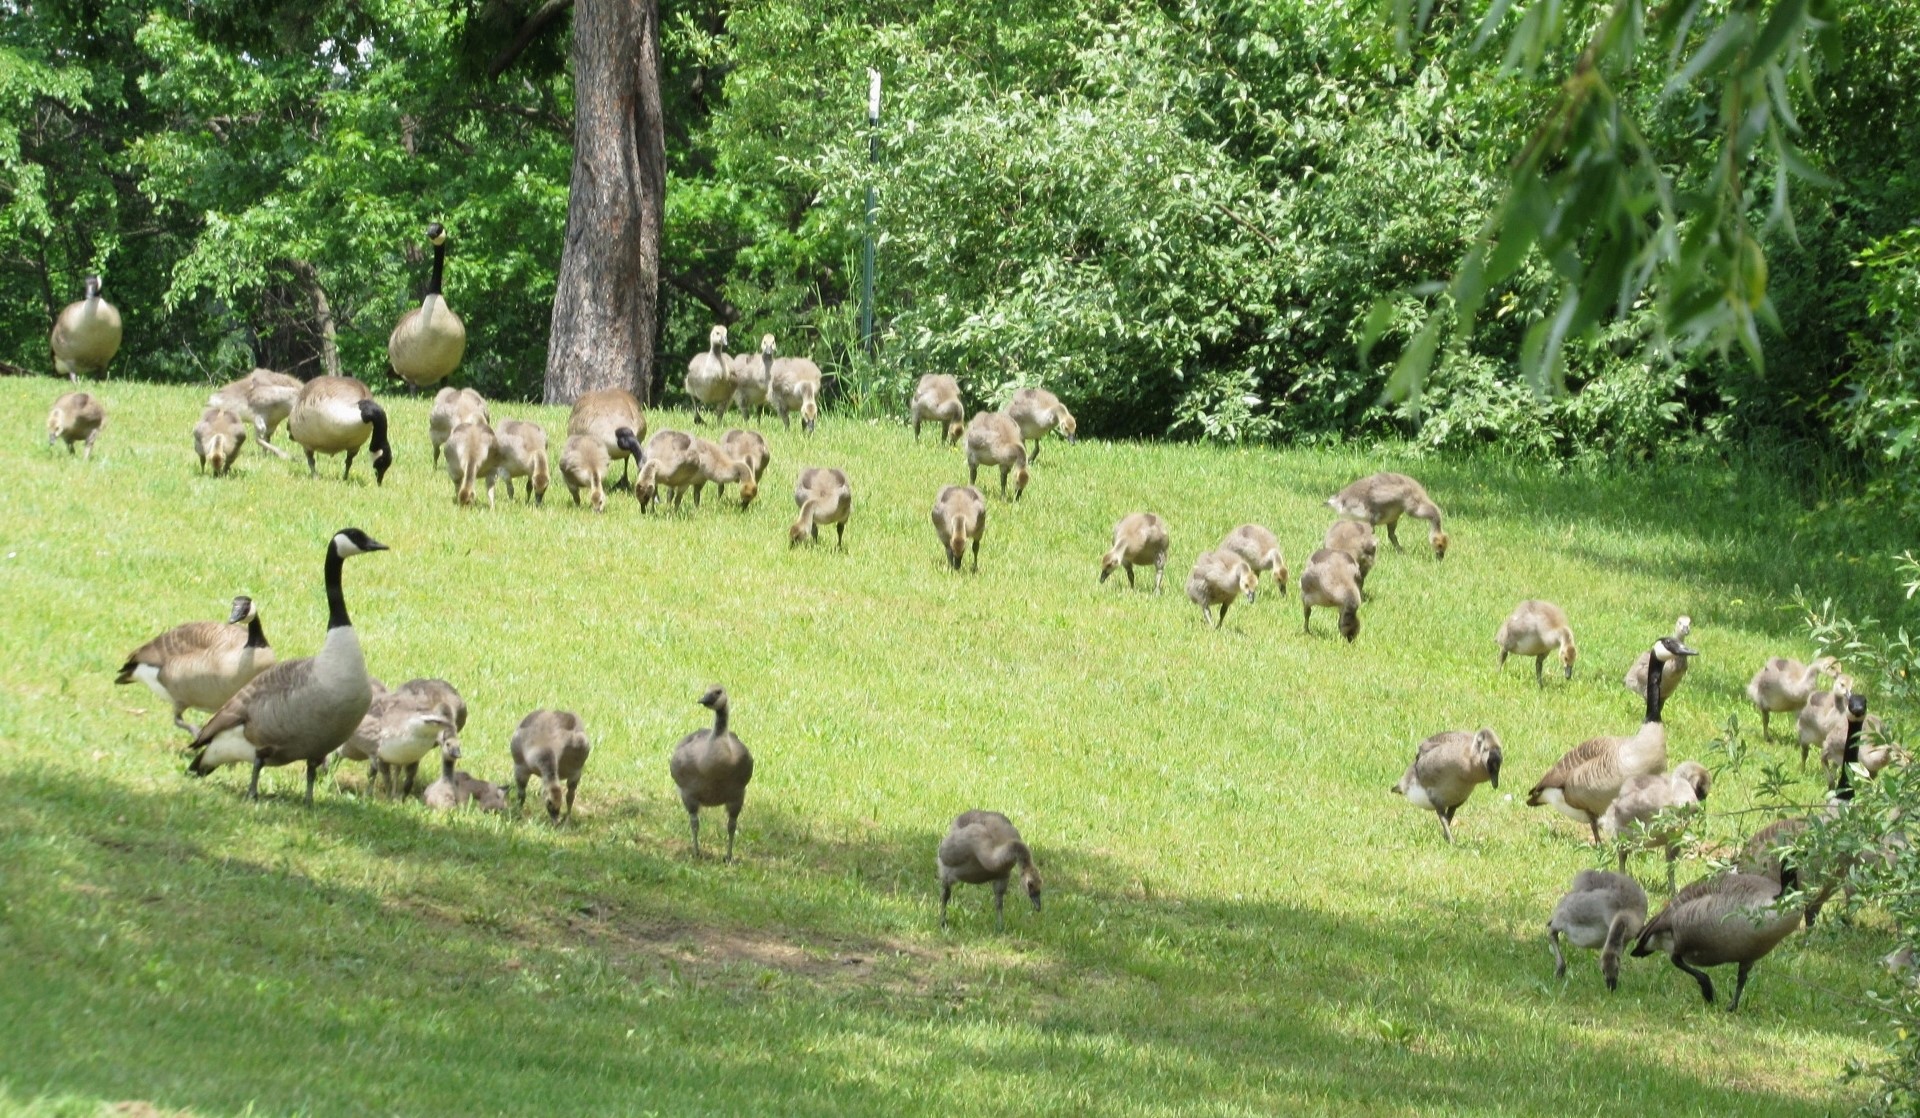 Several geese and their goslings pecking the ground on a grassy hill